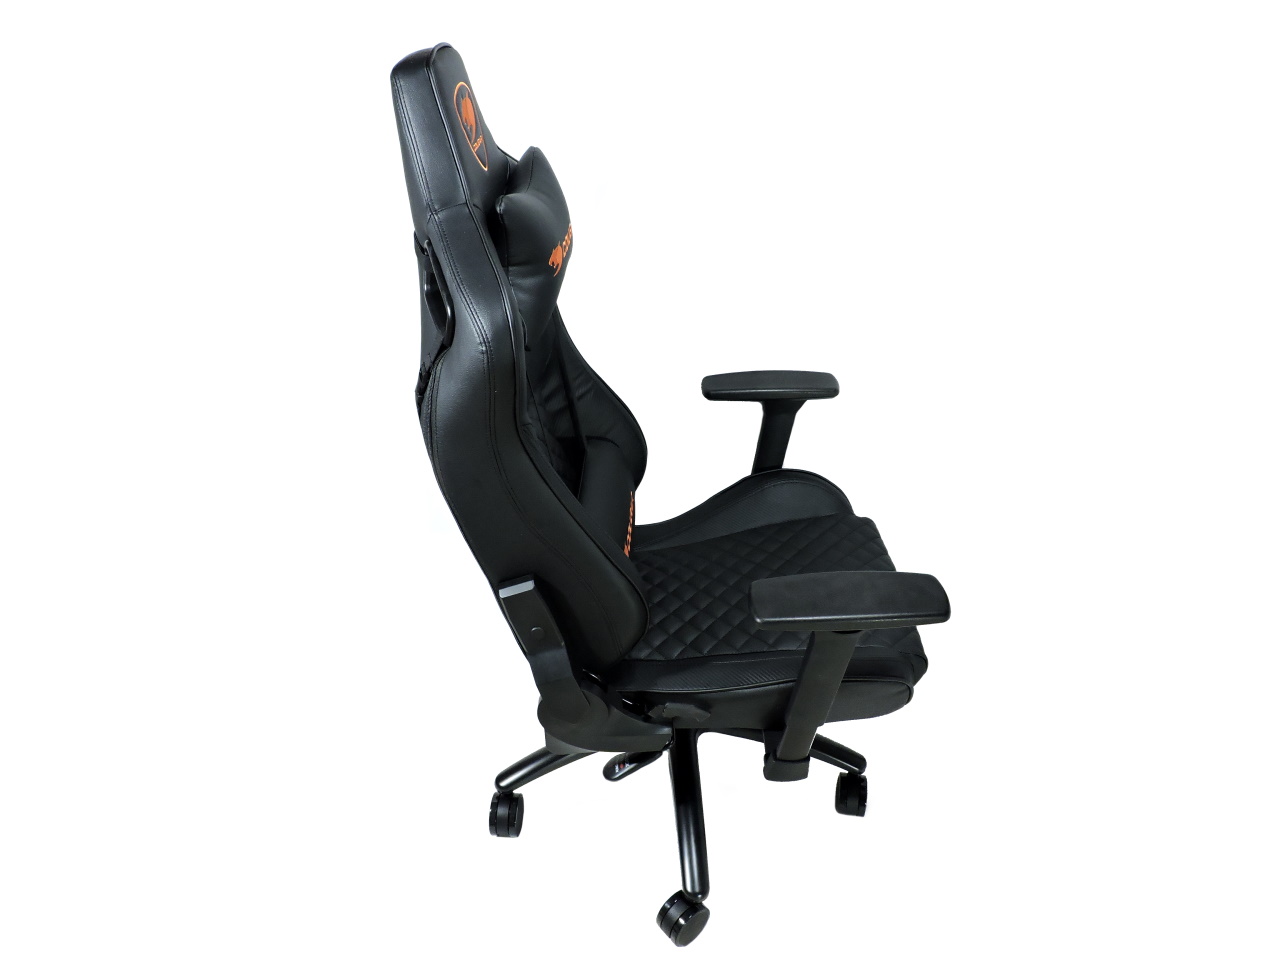 Gaming Chair Review 2021 - Cougar Explore S Gaming Chair 